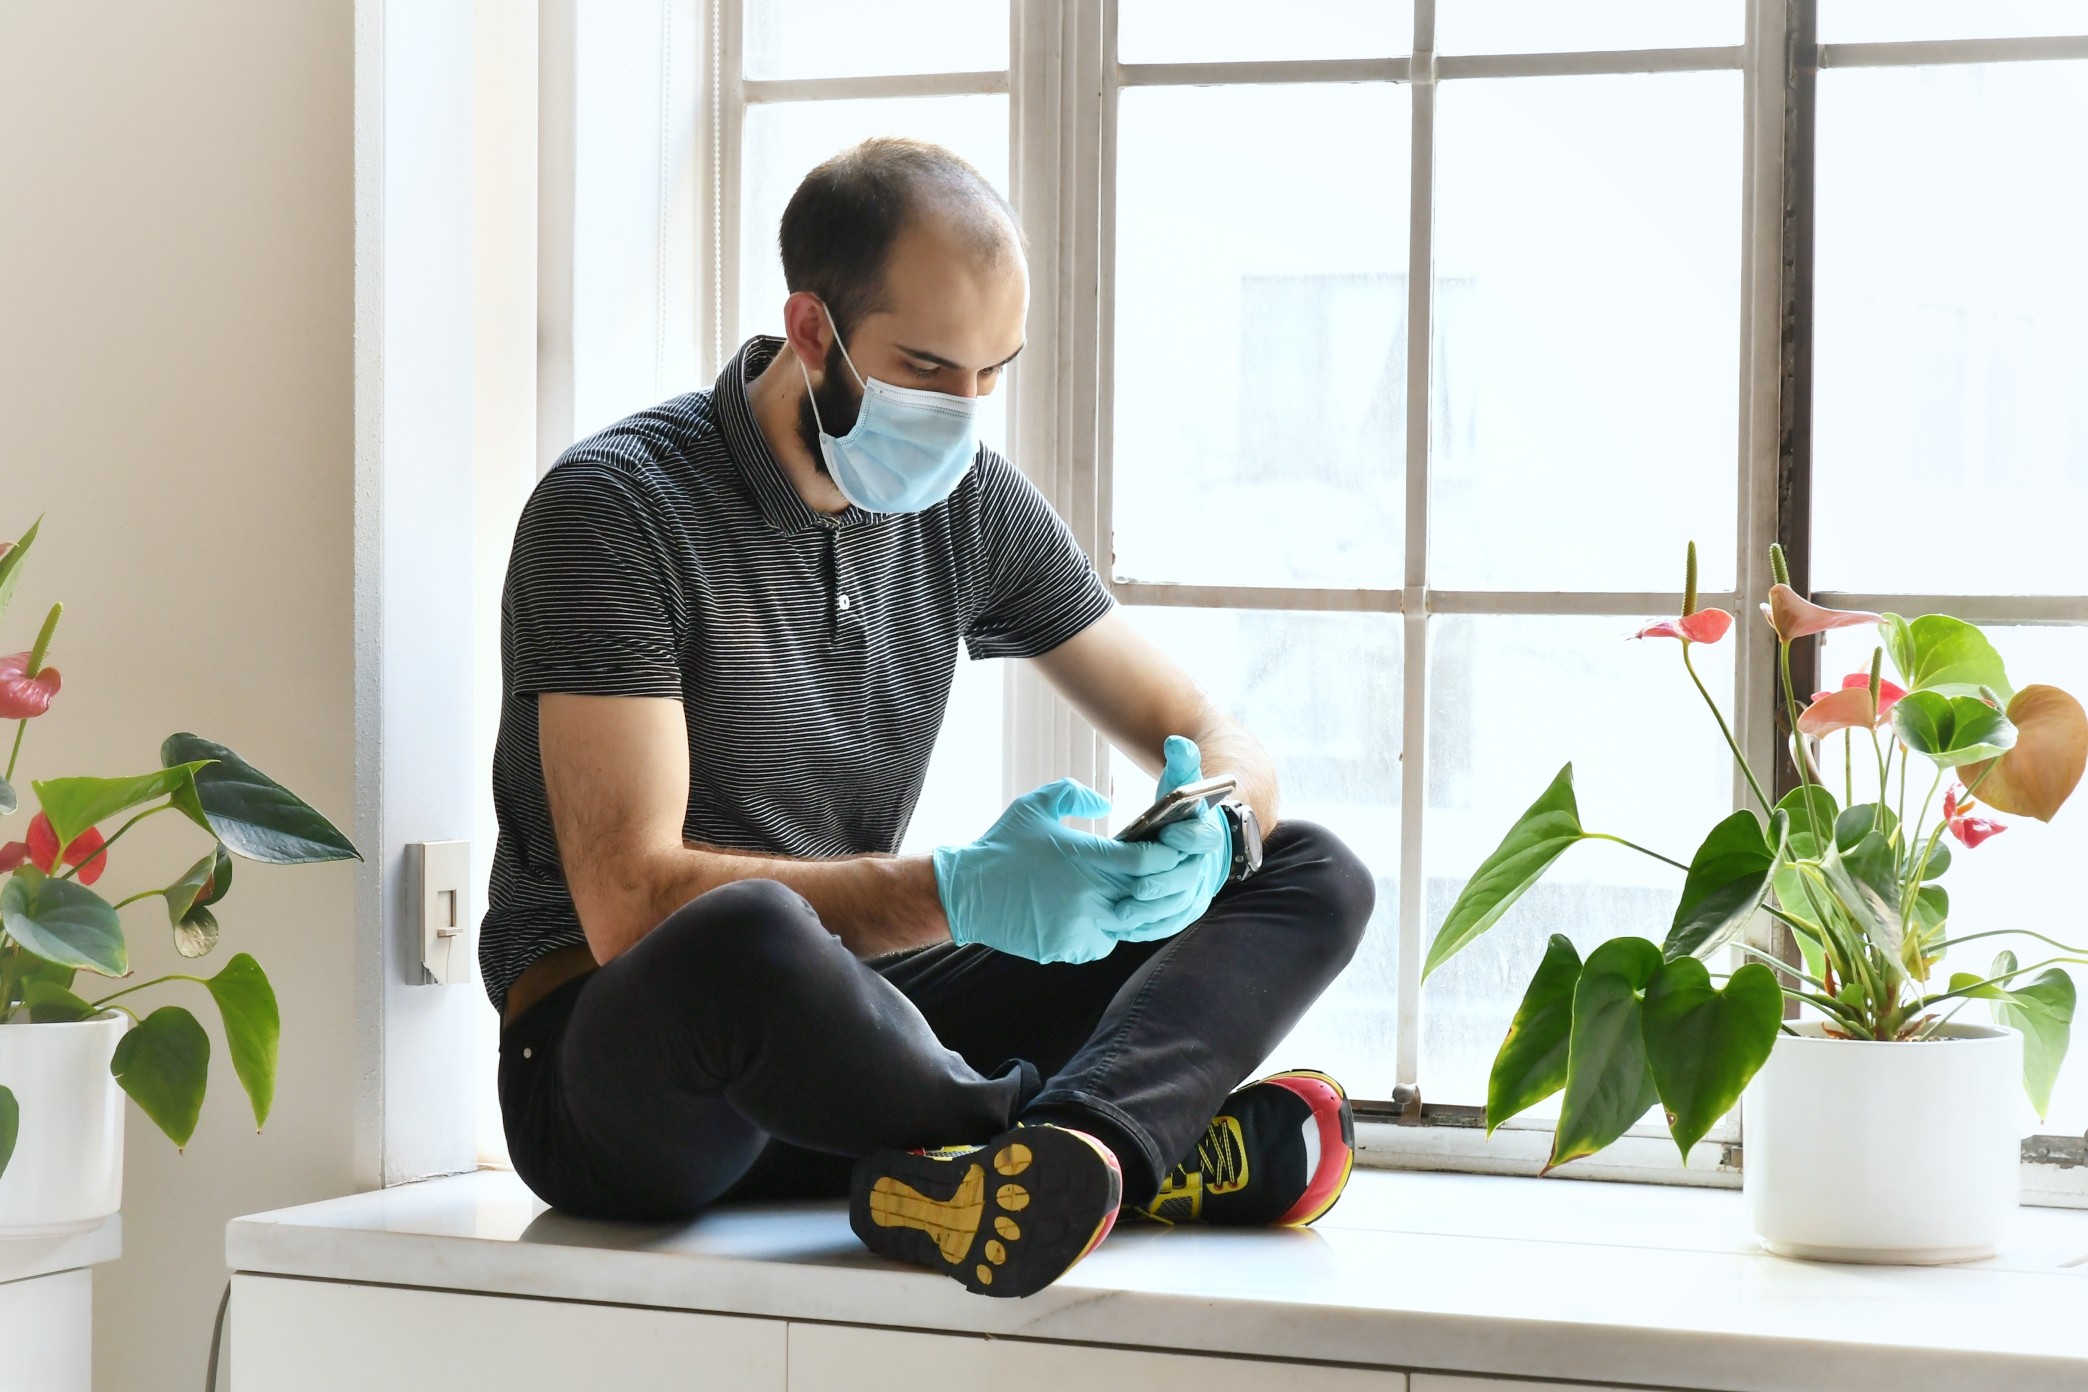 white man sitting on a countertop wearing a face mask and gloves while using a smartphone